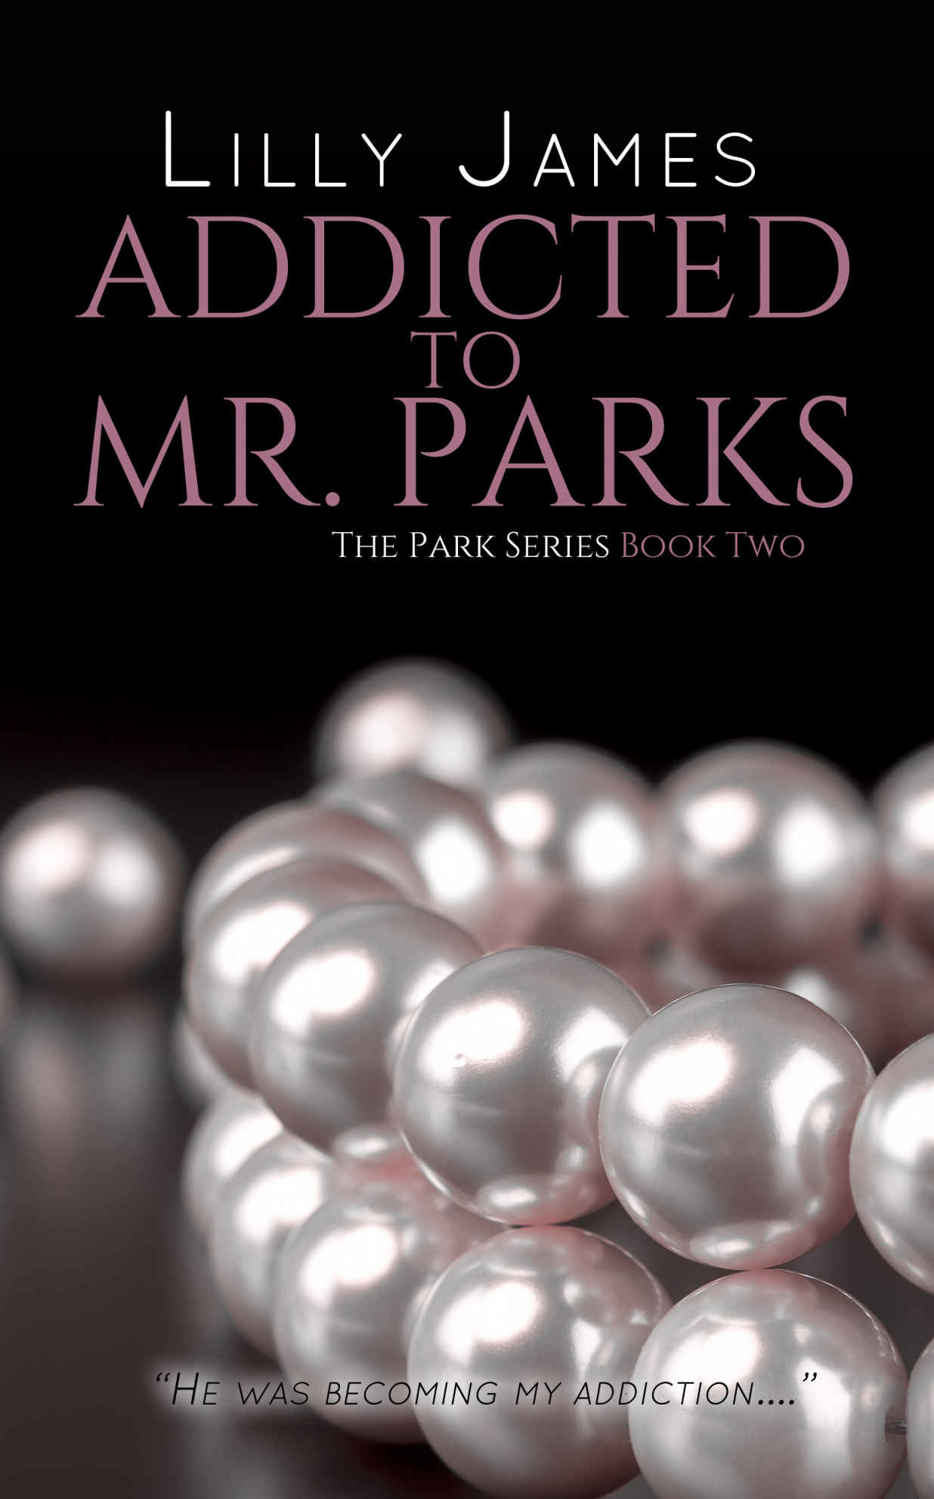 Addicted to Mr. Parks (The Park #2) by Lilly James